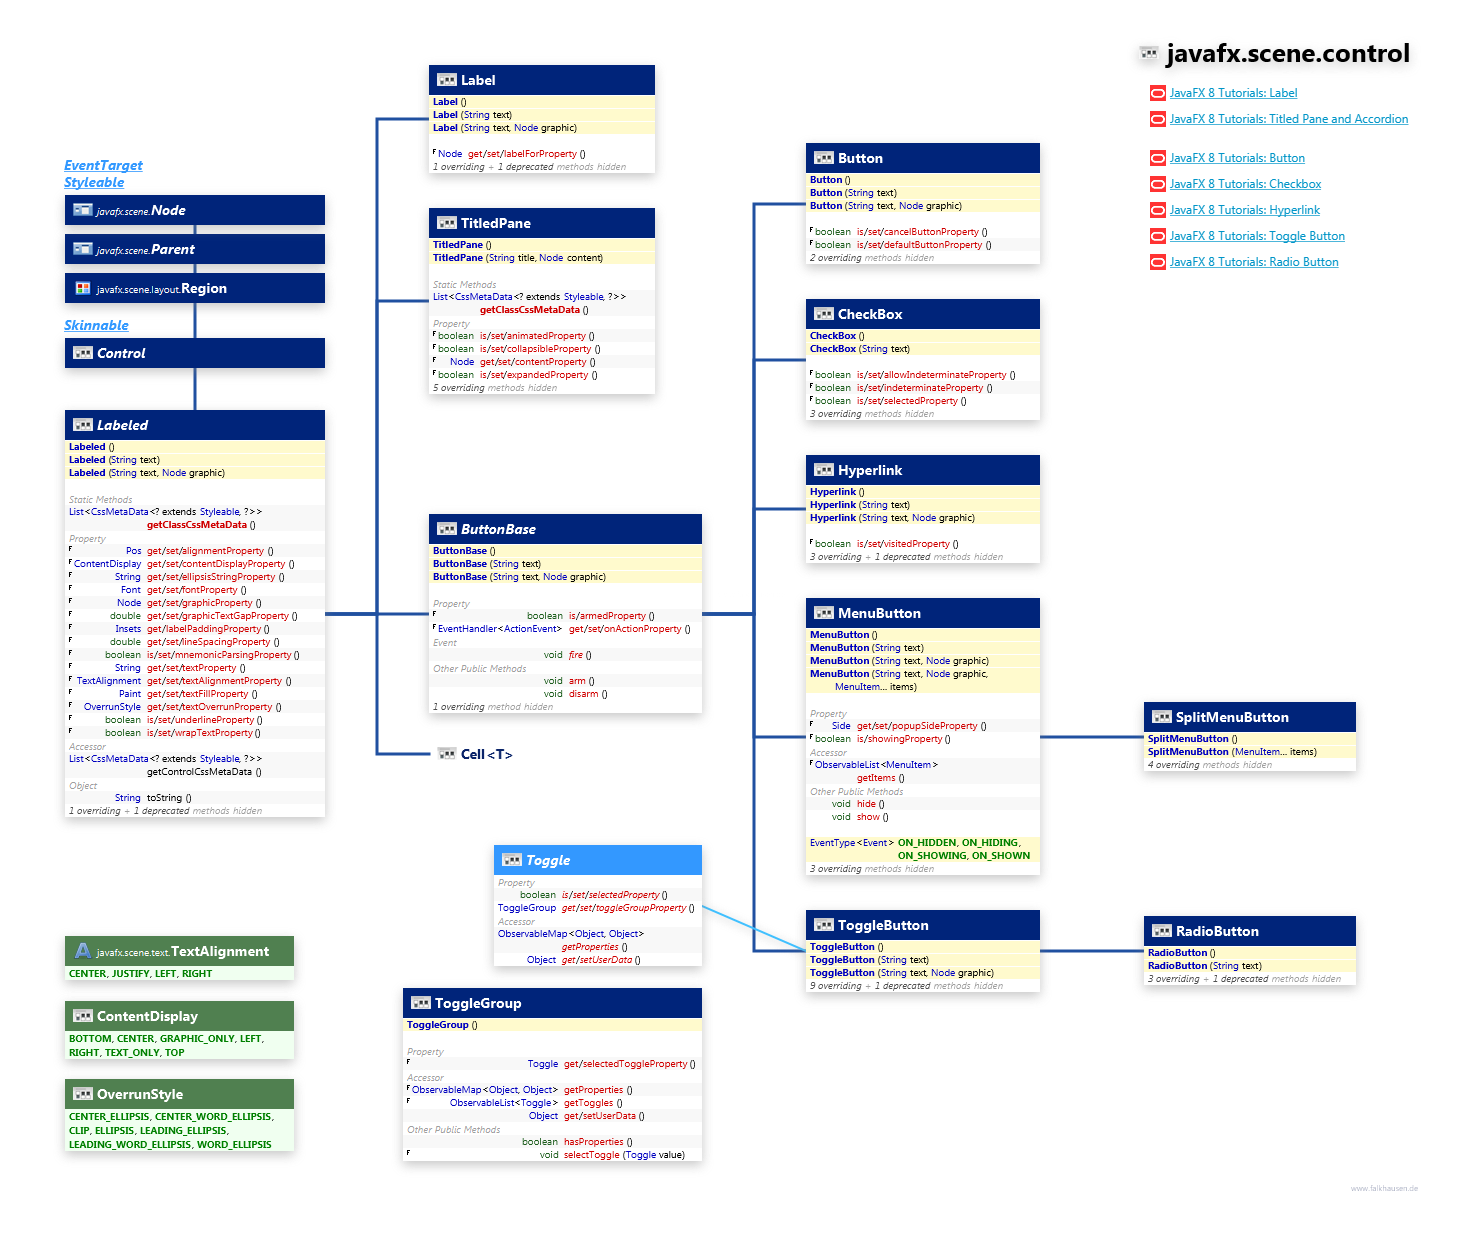 javafx.scene.control Labeled class diagram and api documentation for JavaFX 8